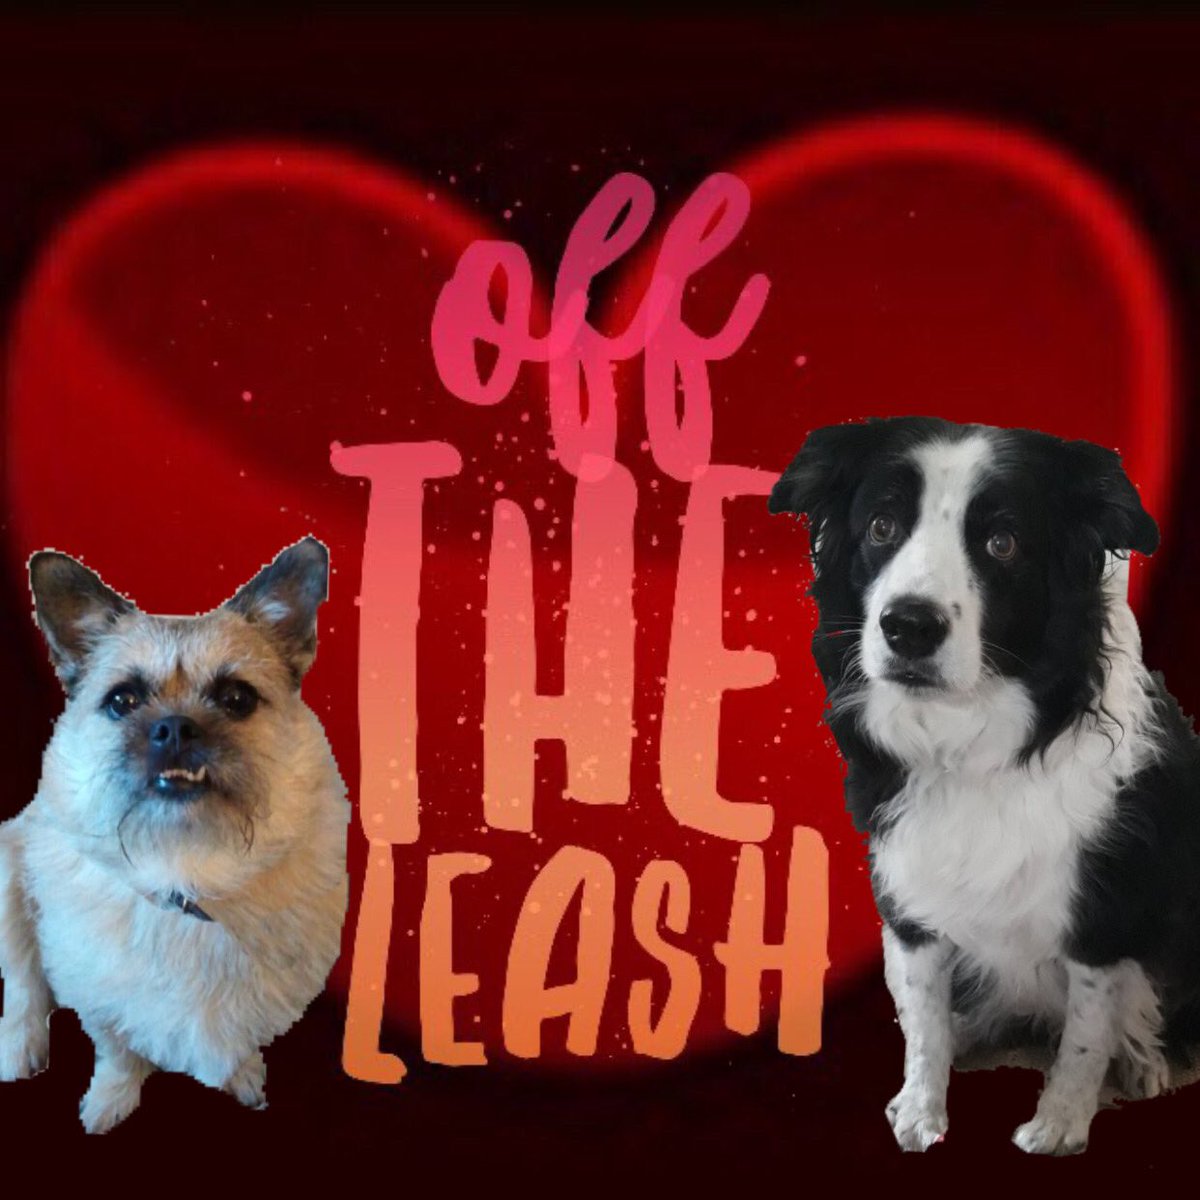 We have this week off but will be back with another great #OTLFP show Saturday May 25th! See you then😀 @STheBoatDog @DillyDollyB @TheHugHouse @SiriusWhite14 @SadGirlbx @LittleTess3 @CharliePurrker @KelliDa80763885 @Henry_Tzu @WonderWilbur @ScotBEricTrev @PugnatiousG